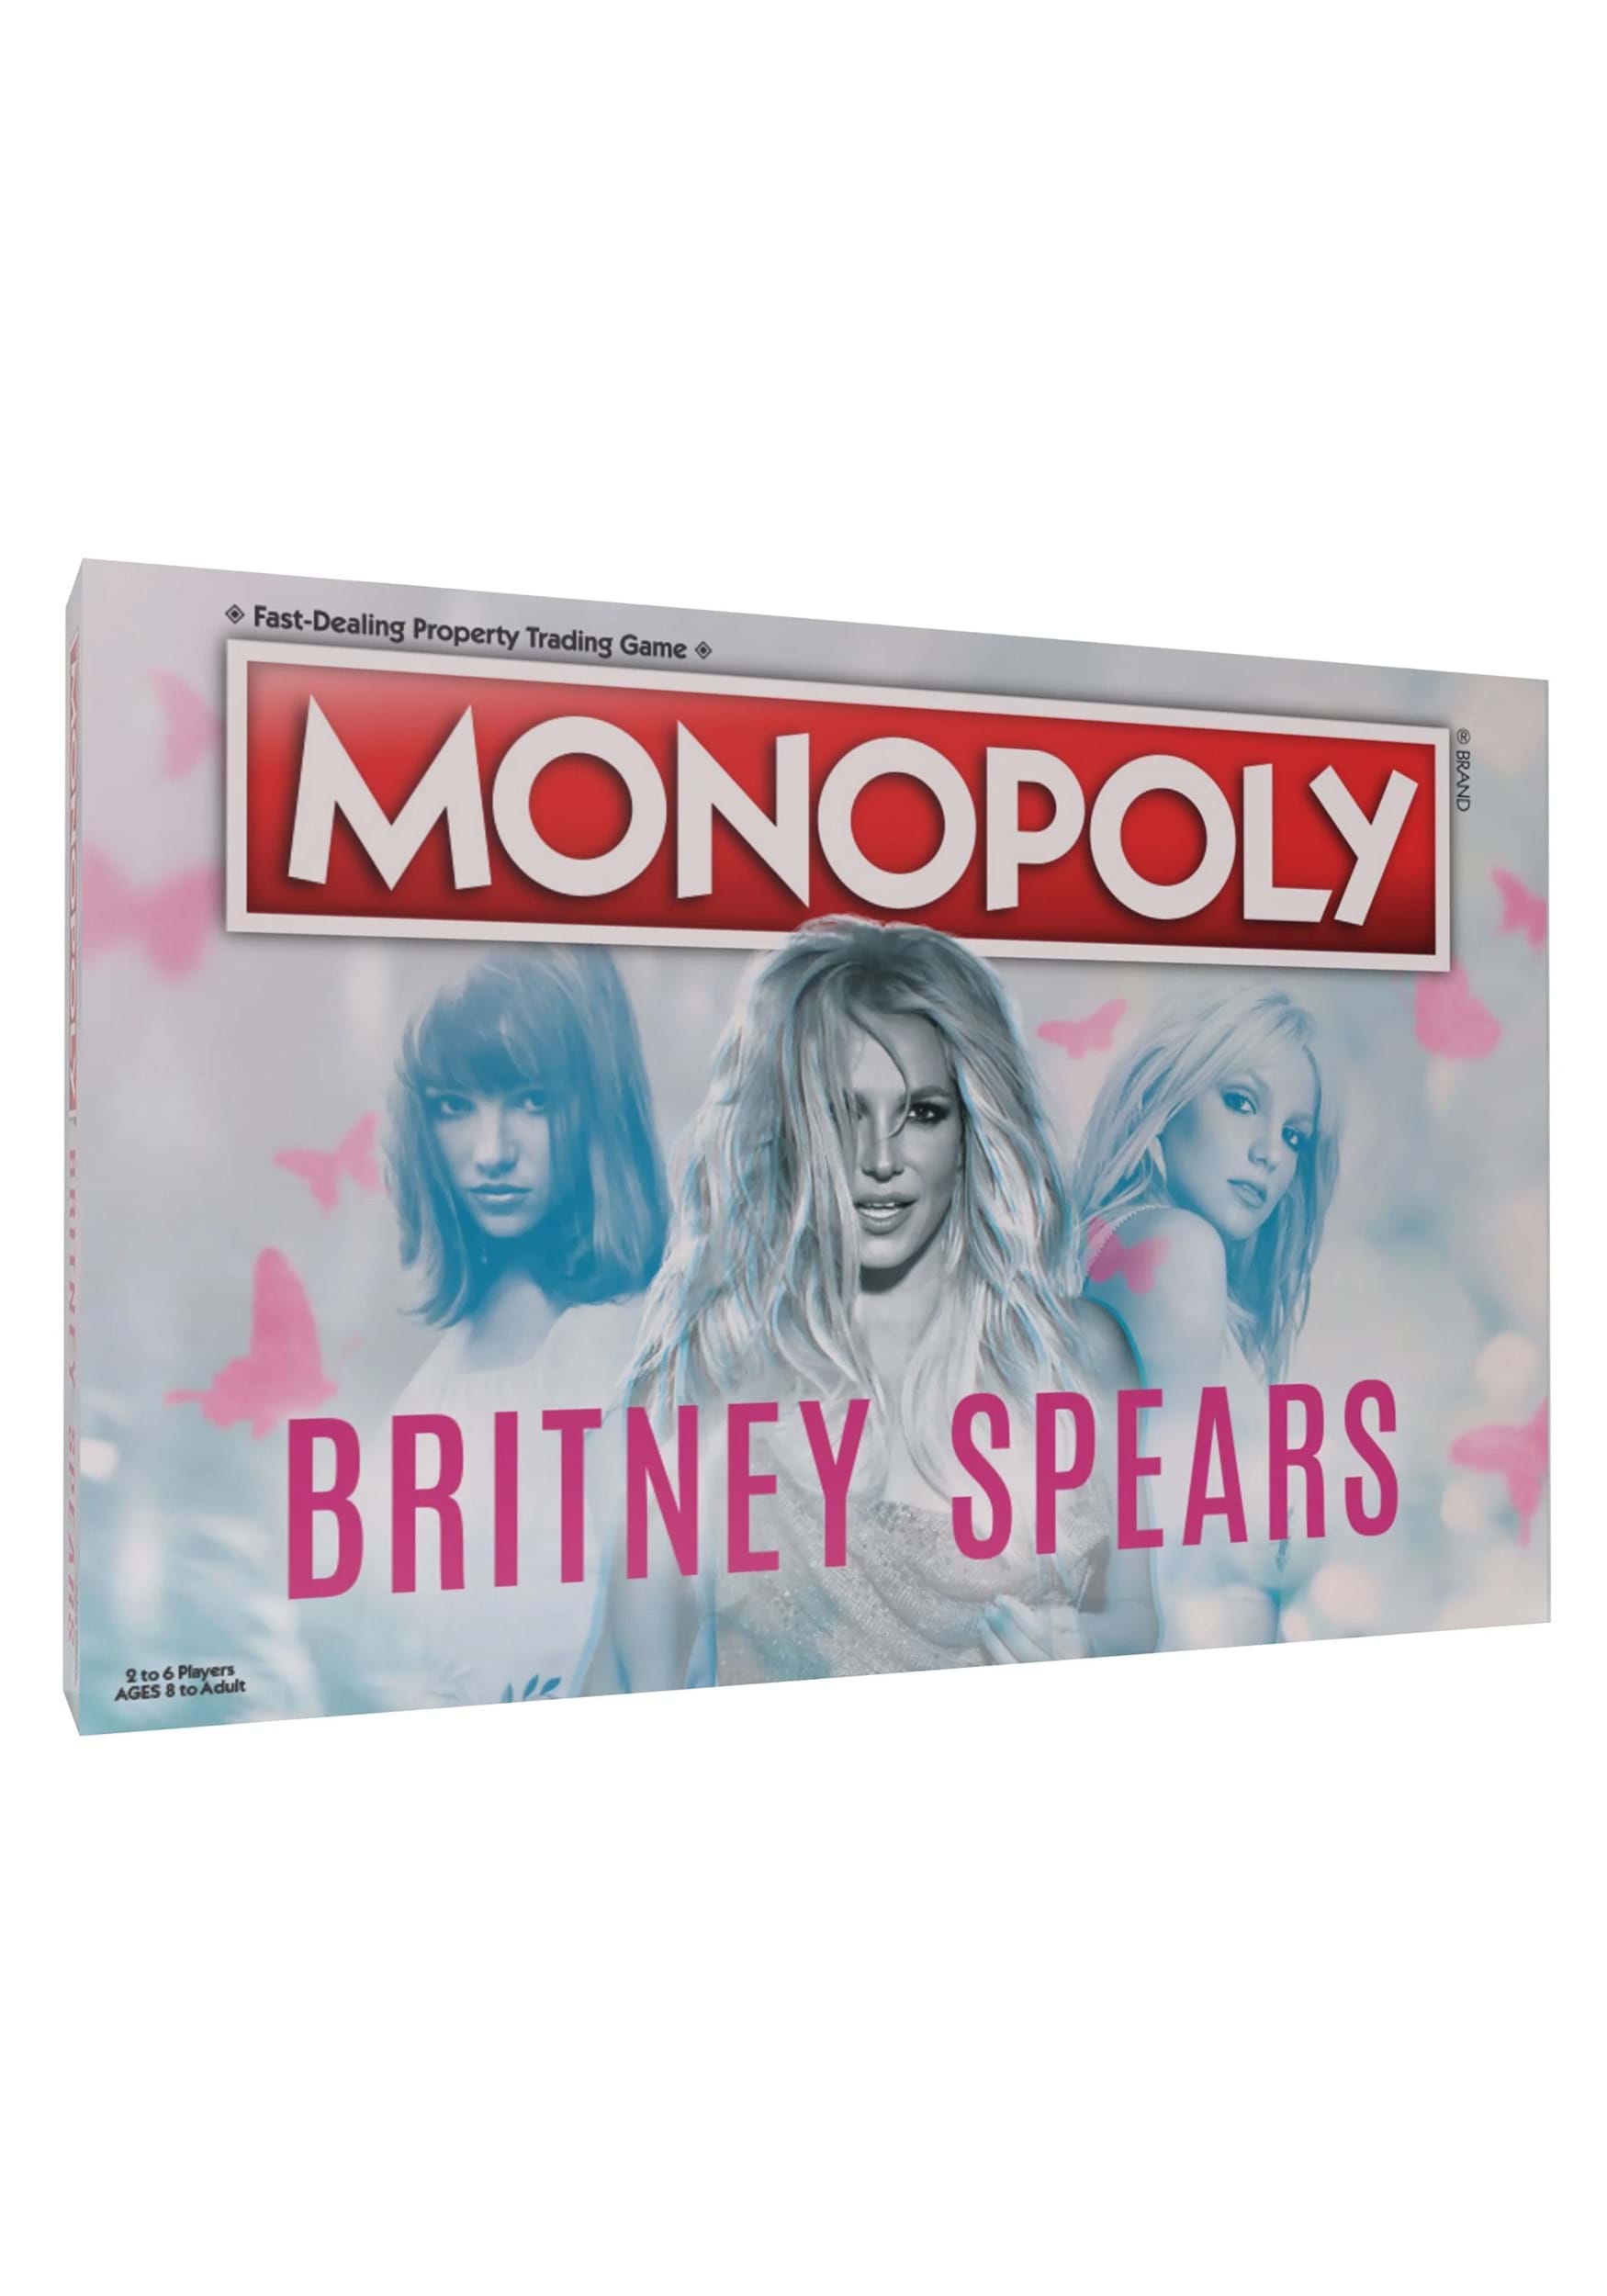 Monopoly Britney Spears Edition